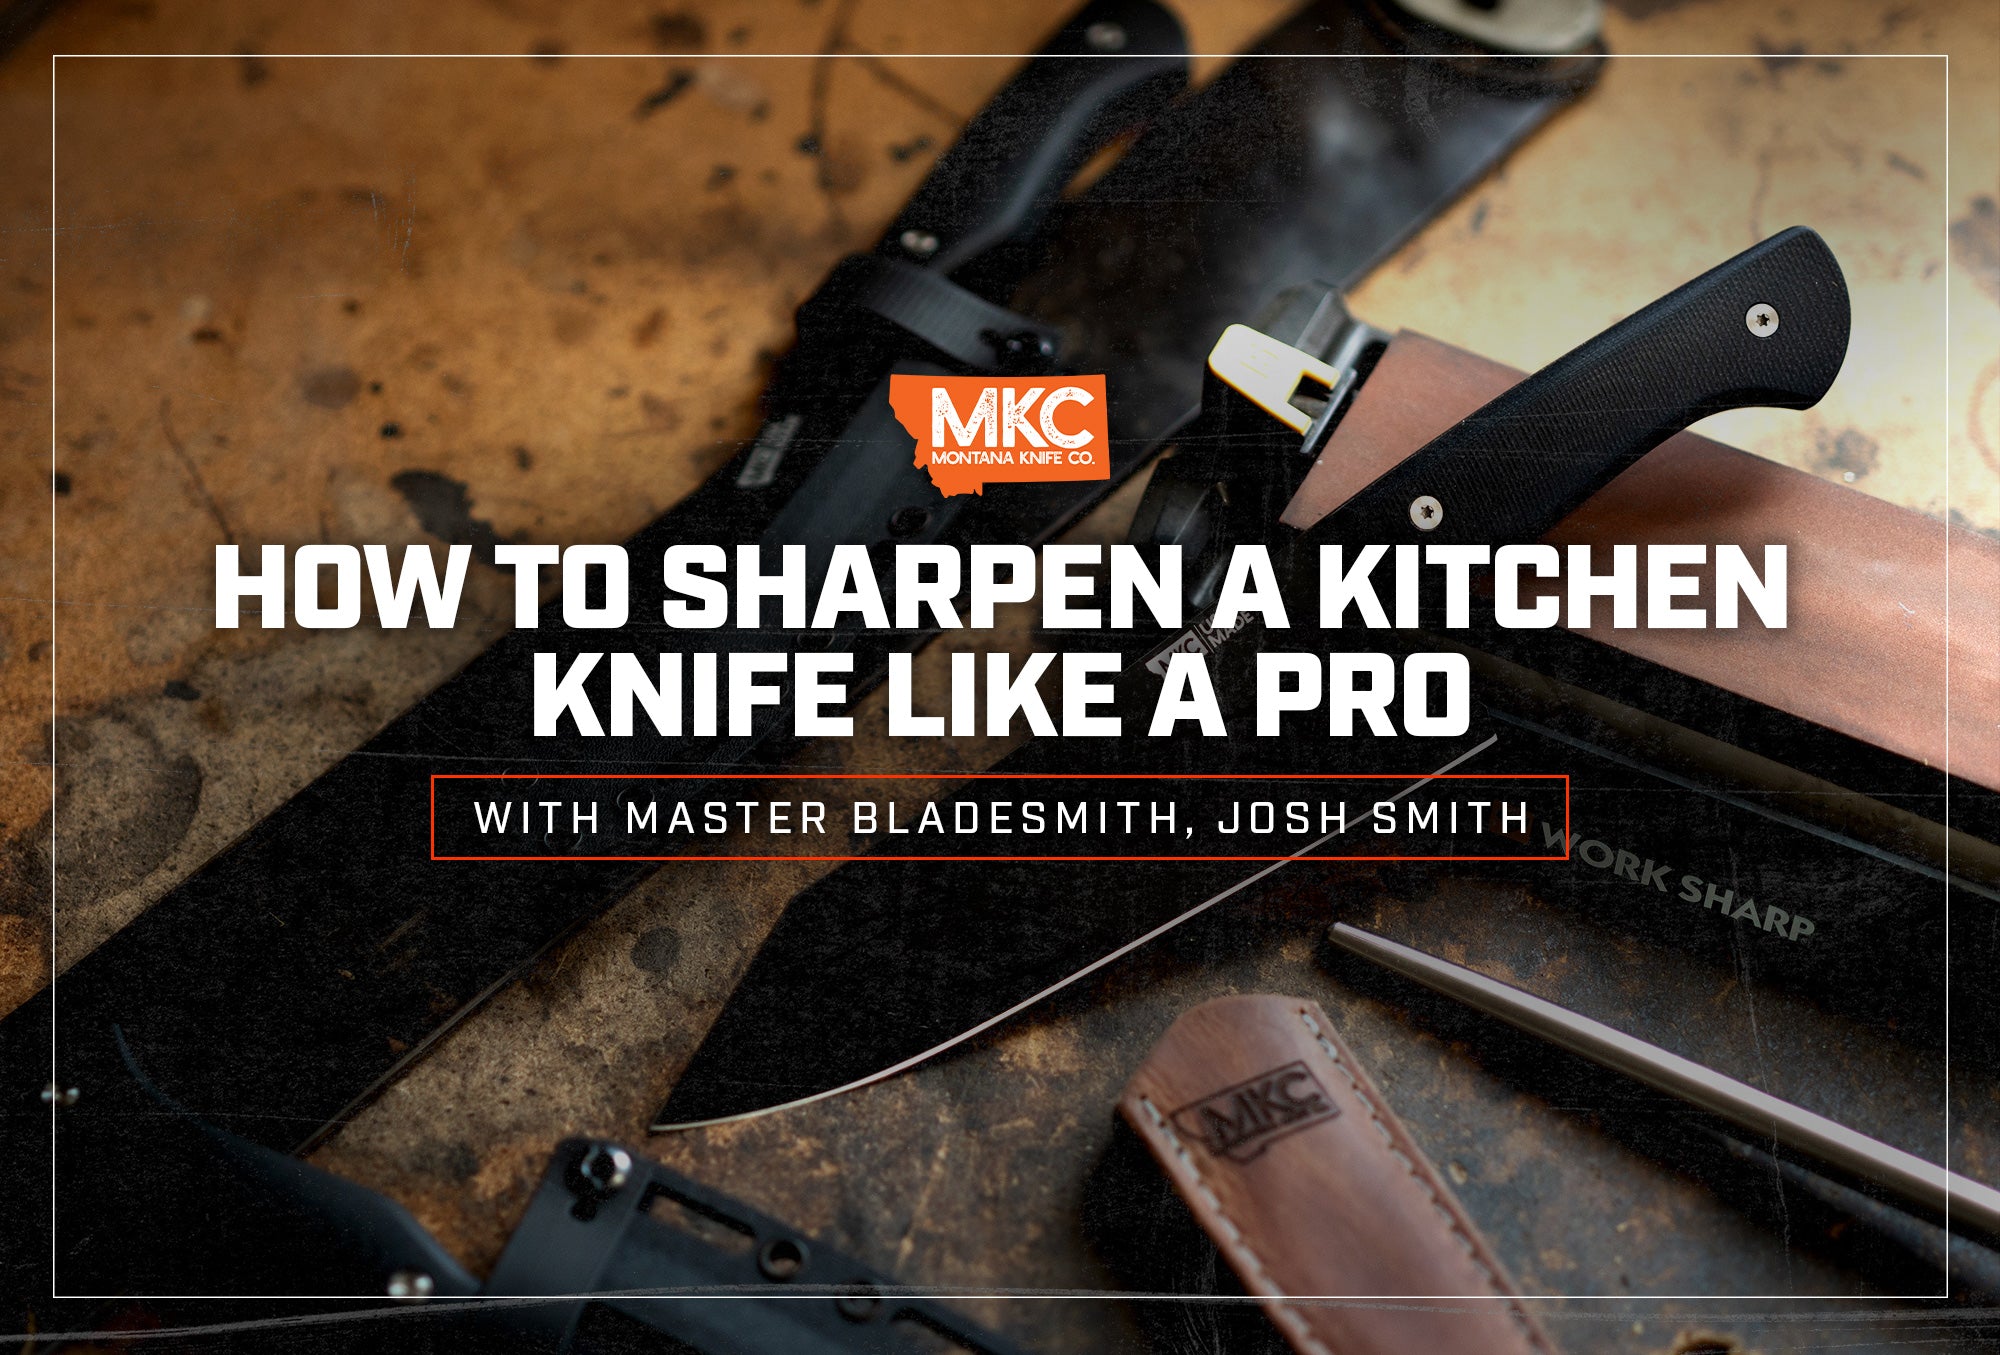 A Sharp Knife is a Safer Knife - Get Your Knives Sharpened by a